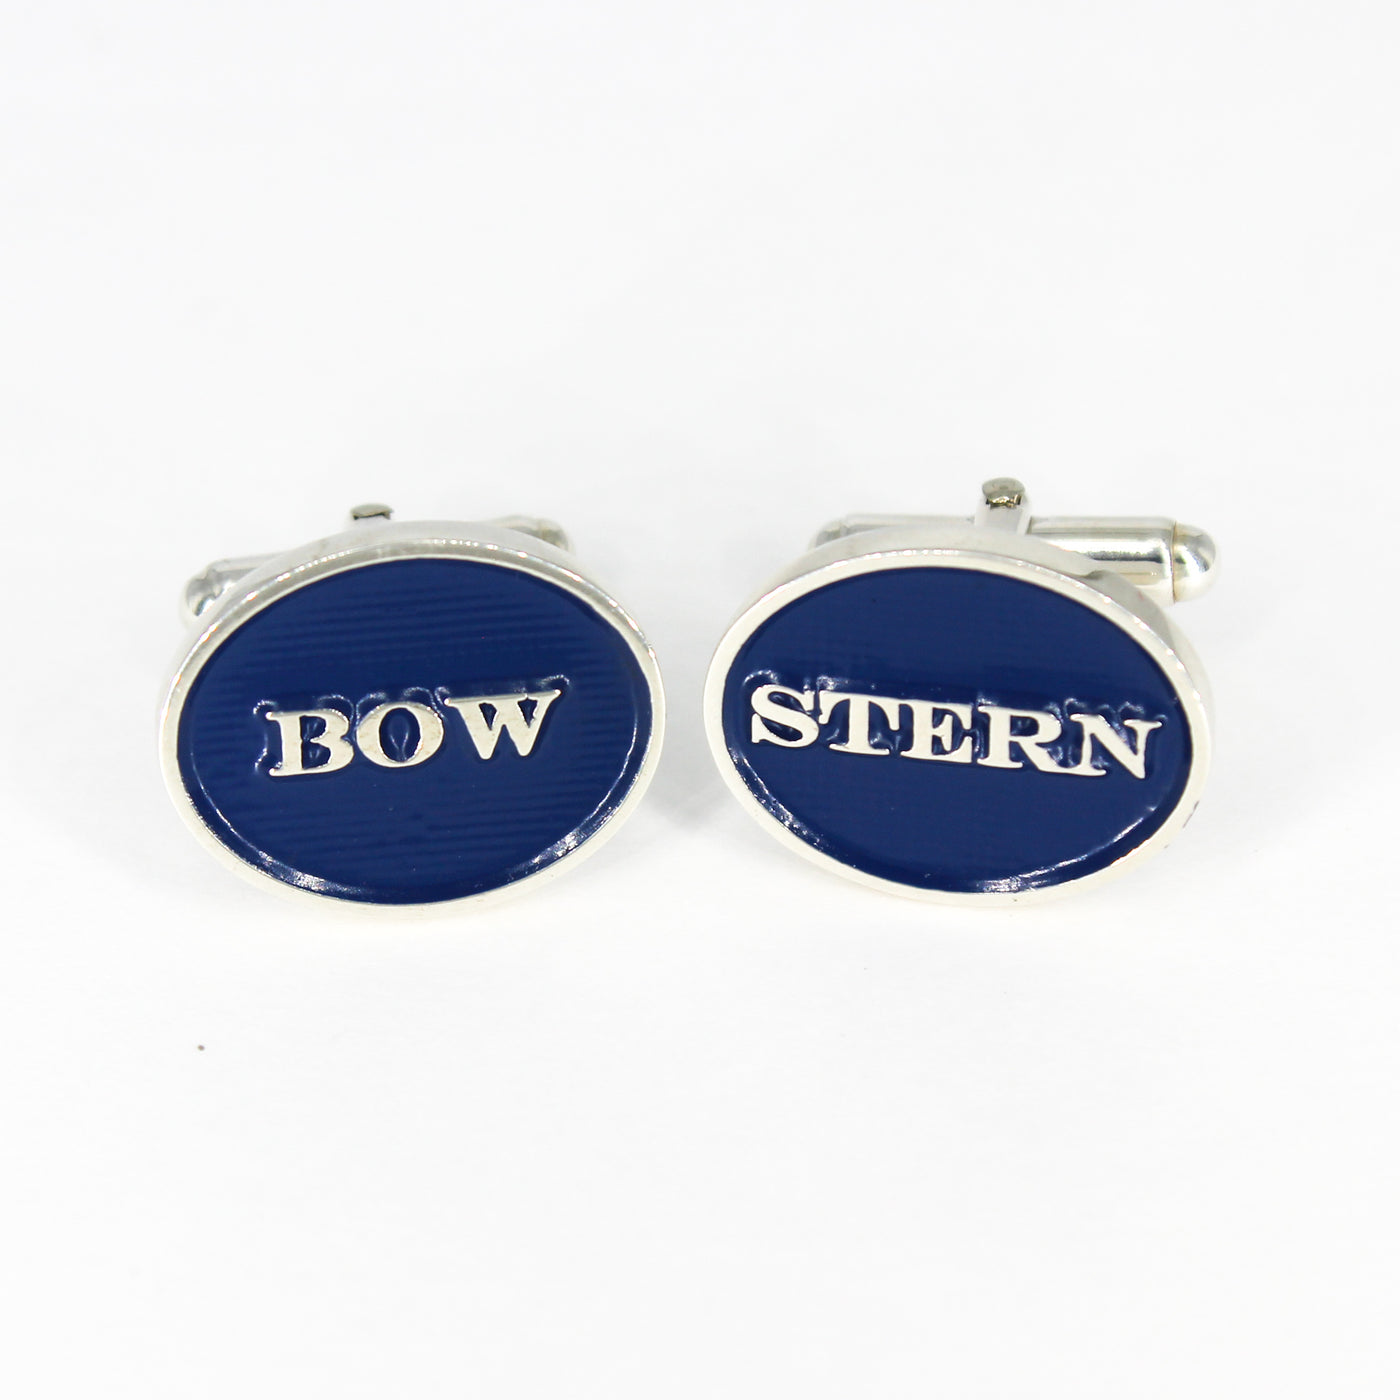 Handmade Sterling Silver Bow and Stern Cufflinks